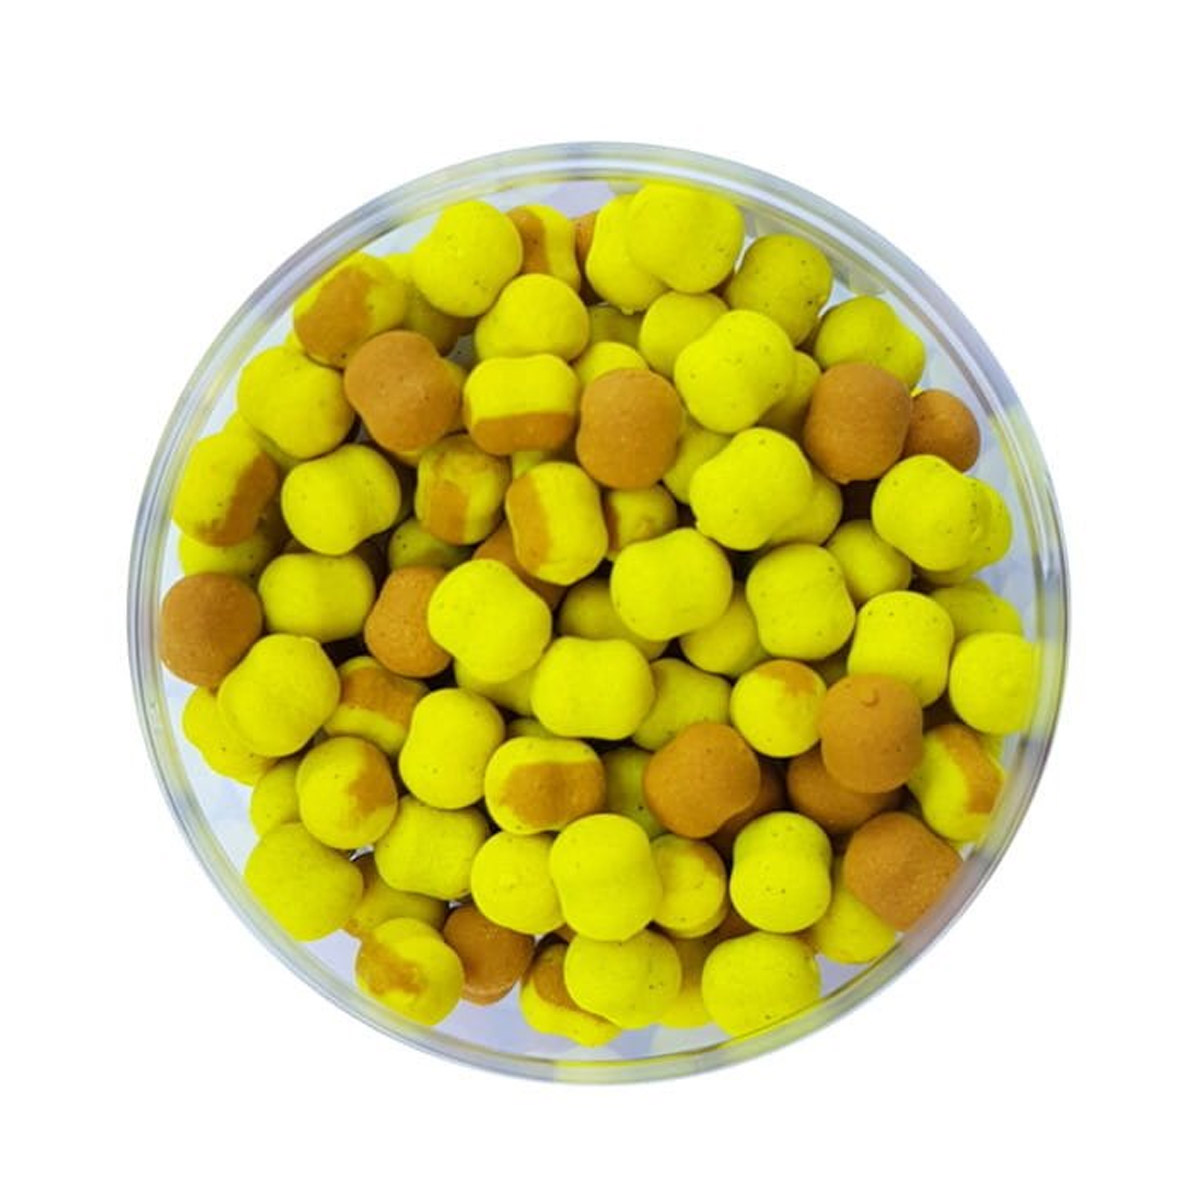 Sonubaits Band'um Wafter Banoffee -  6 mm -  8 mm -  10 mm